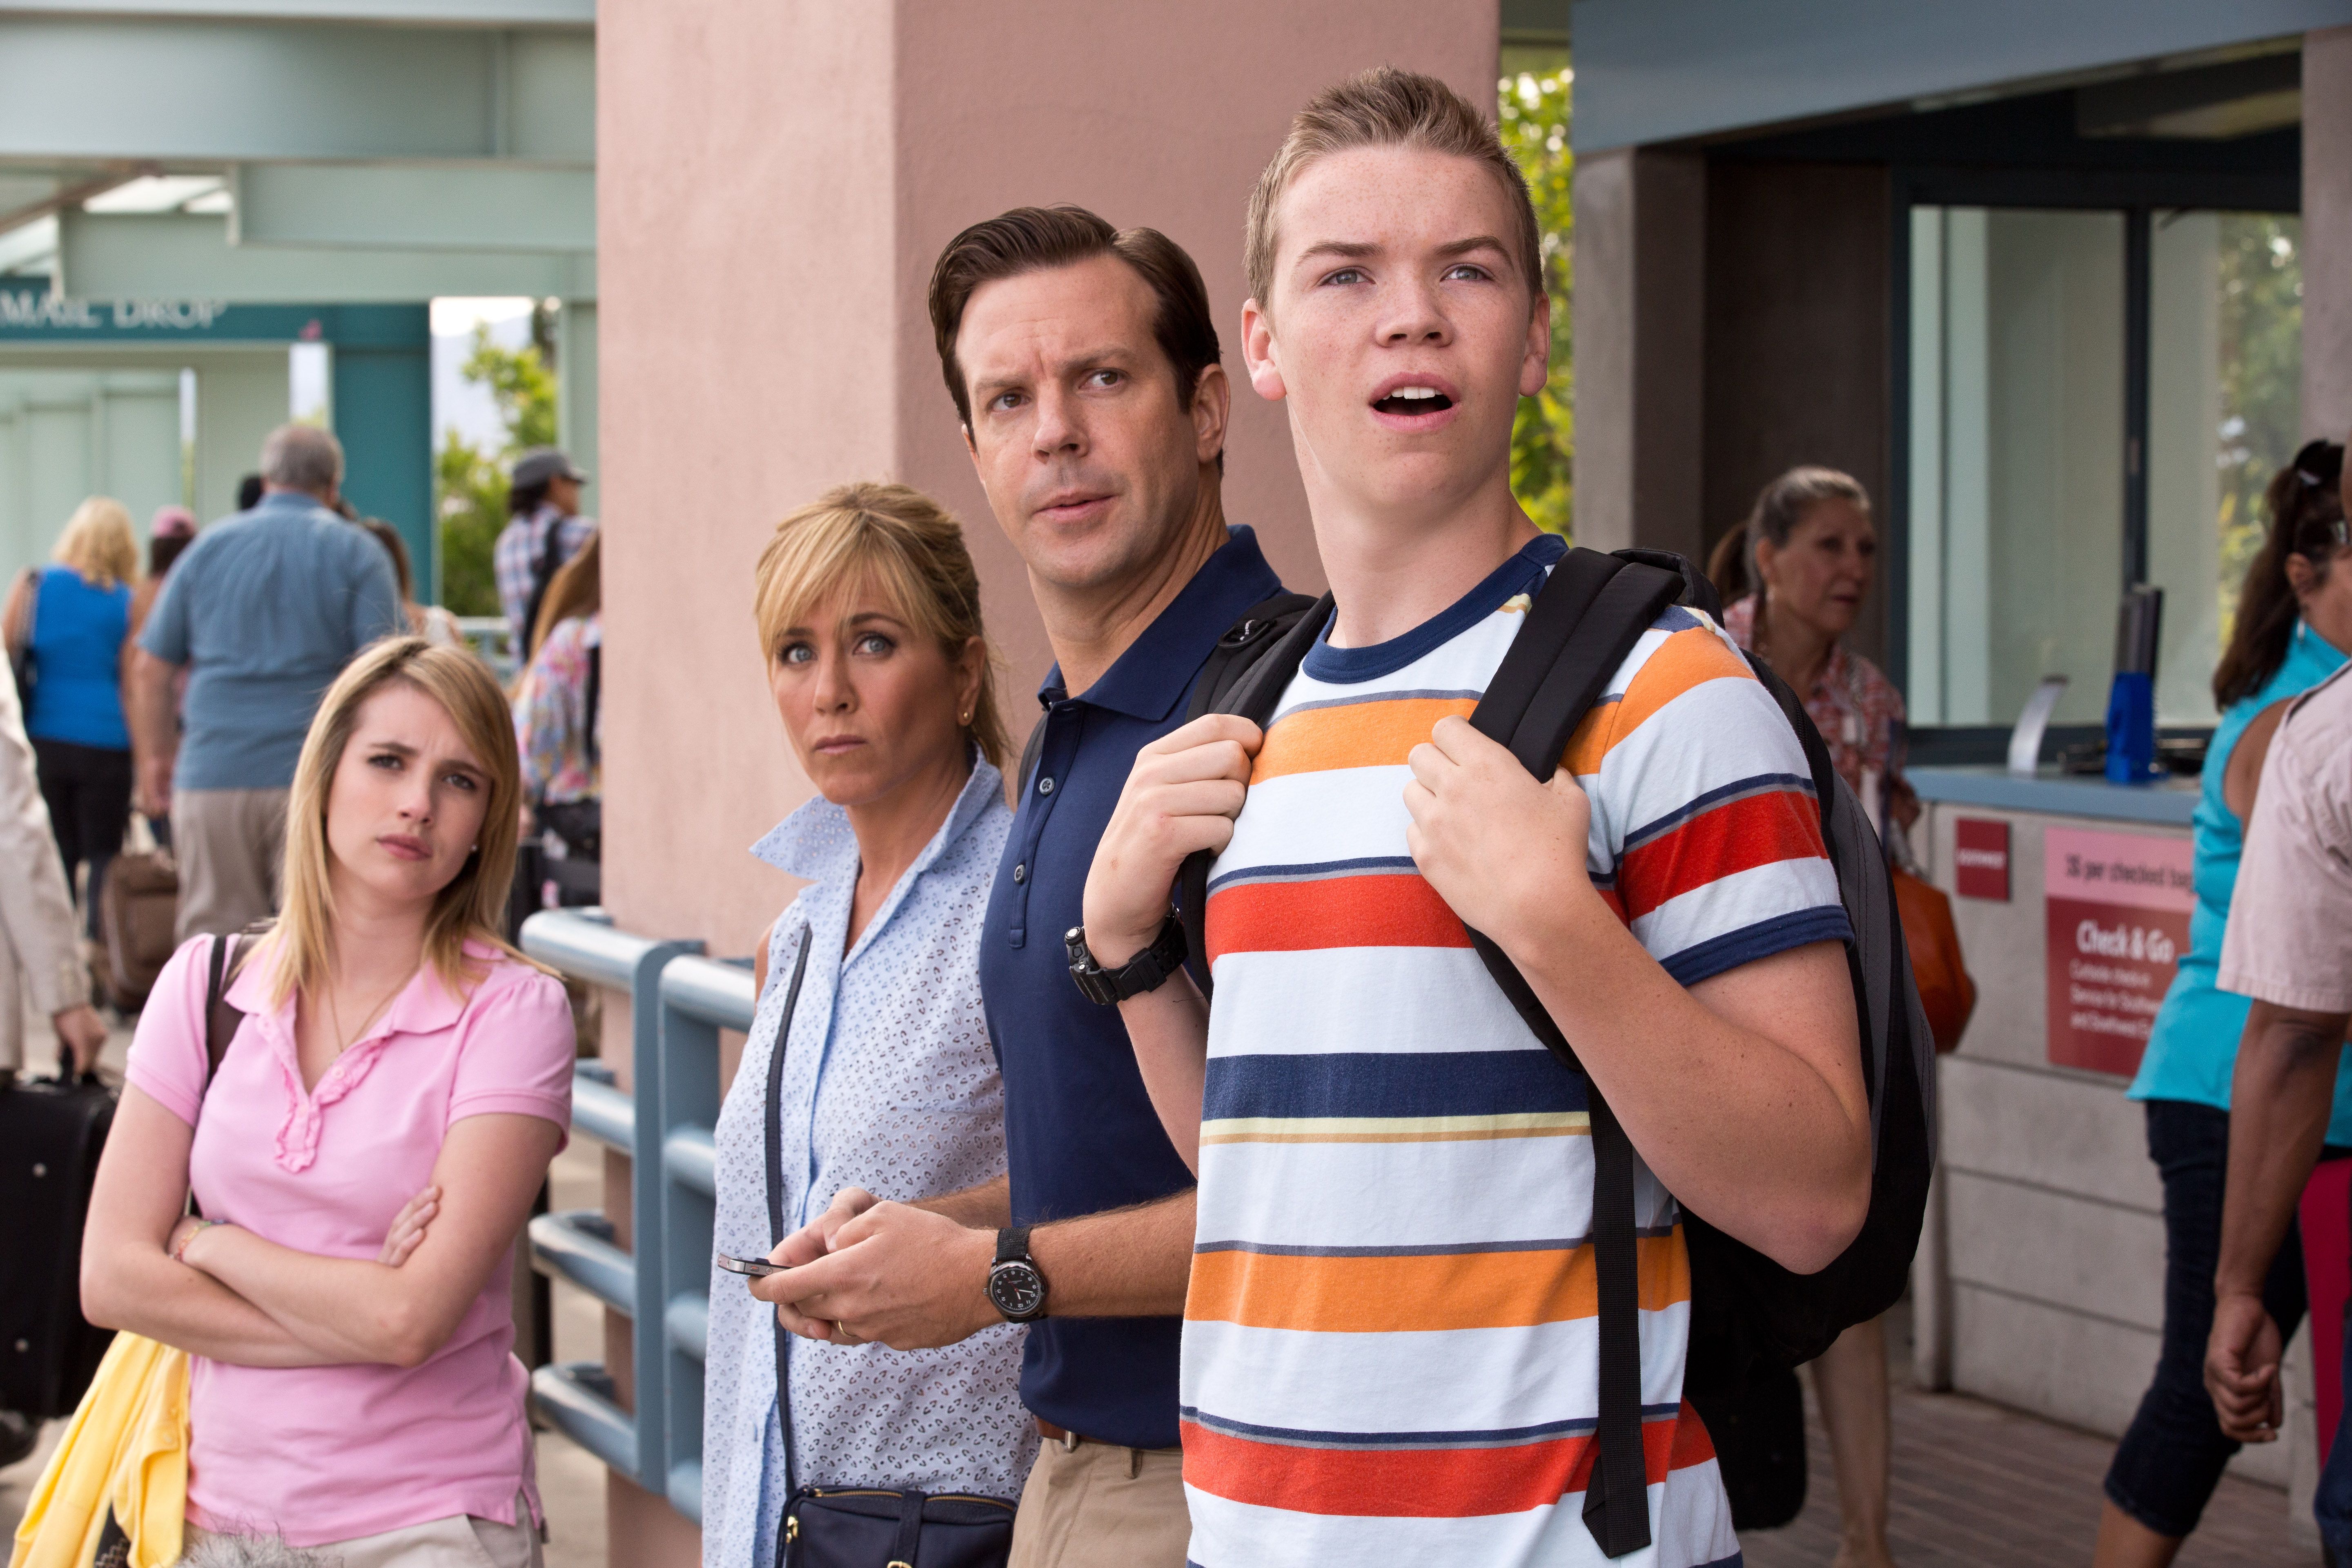 WE'RE THE MILLERS Image. 